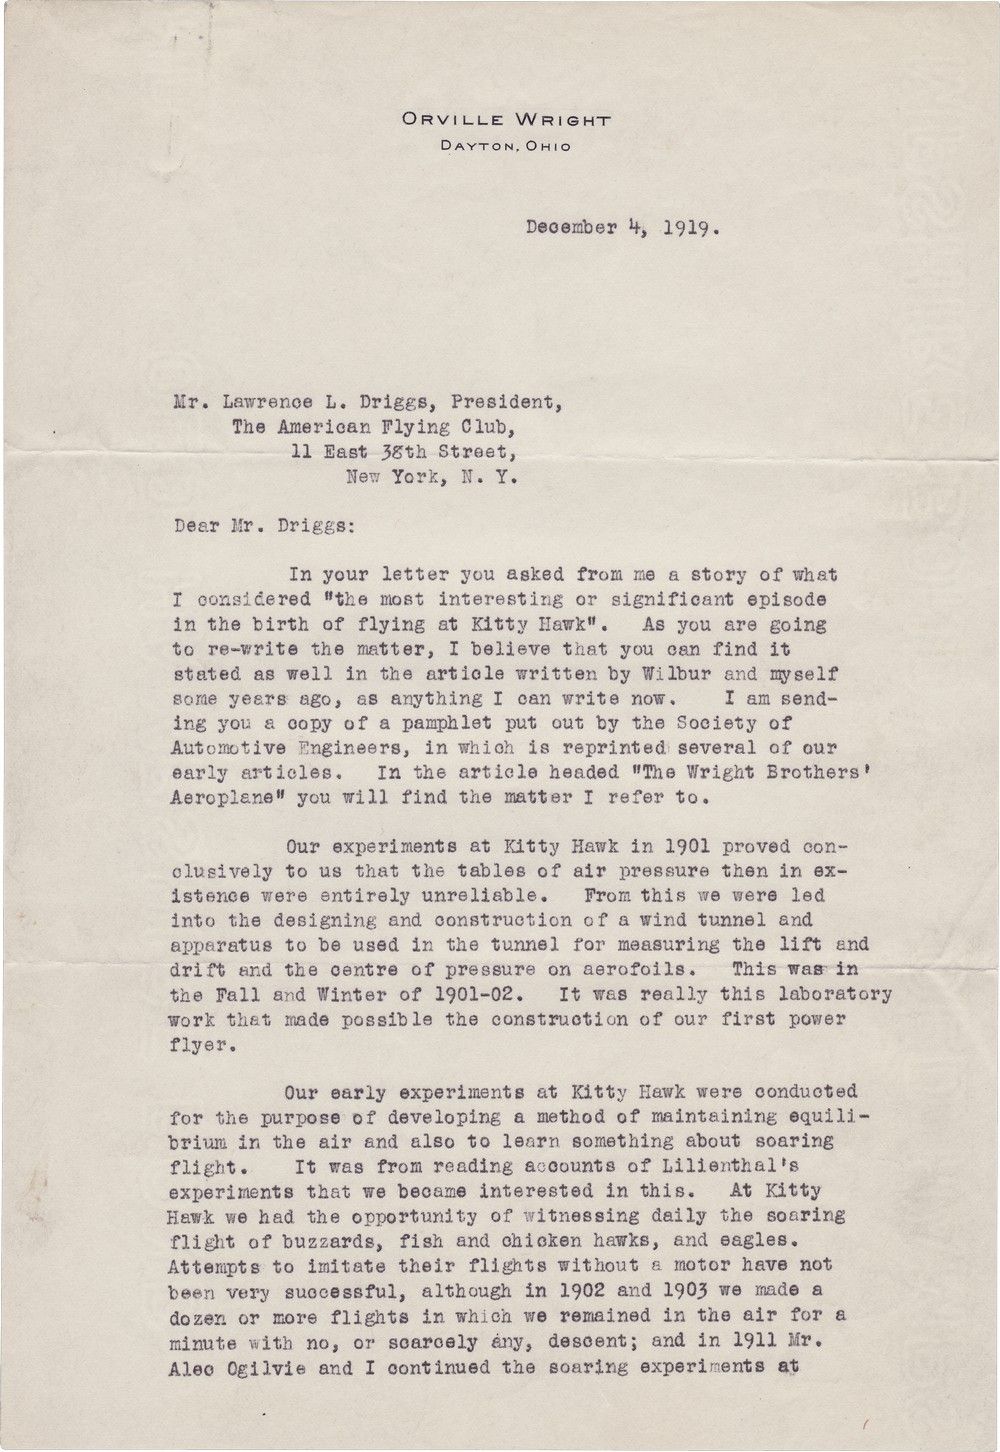 Extraordinary Orville Wright Letter Discussing the Birth of Manned Flight at Kitty Hawk